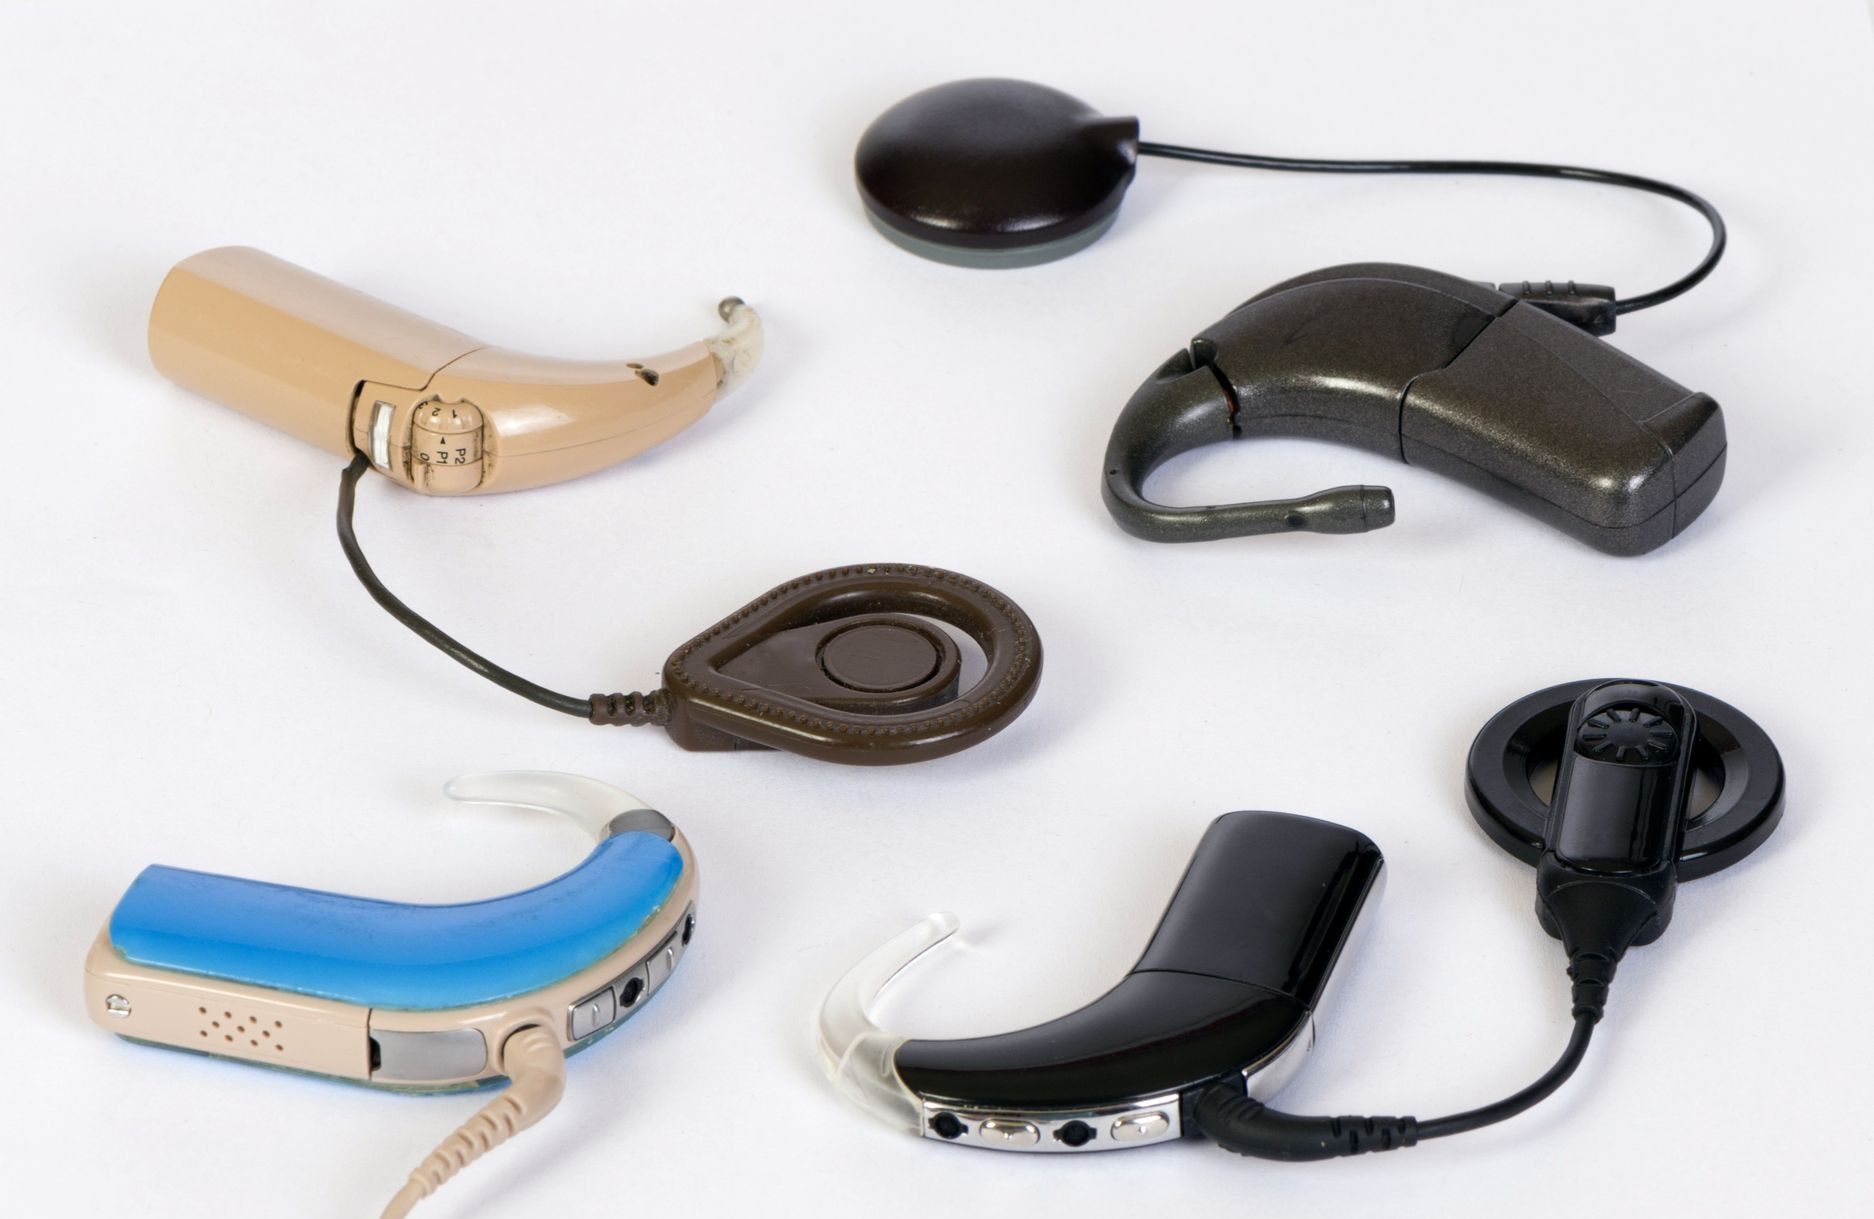 What is the benefit of cochlear implants over hearing aids?